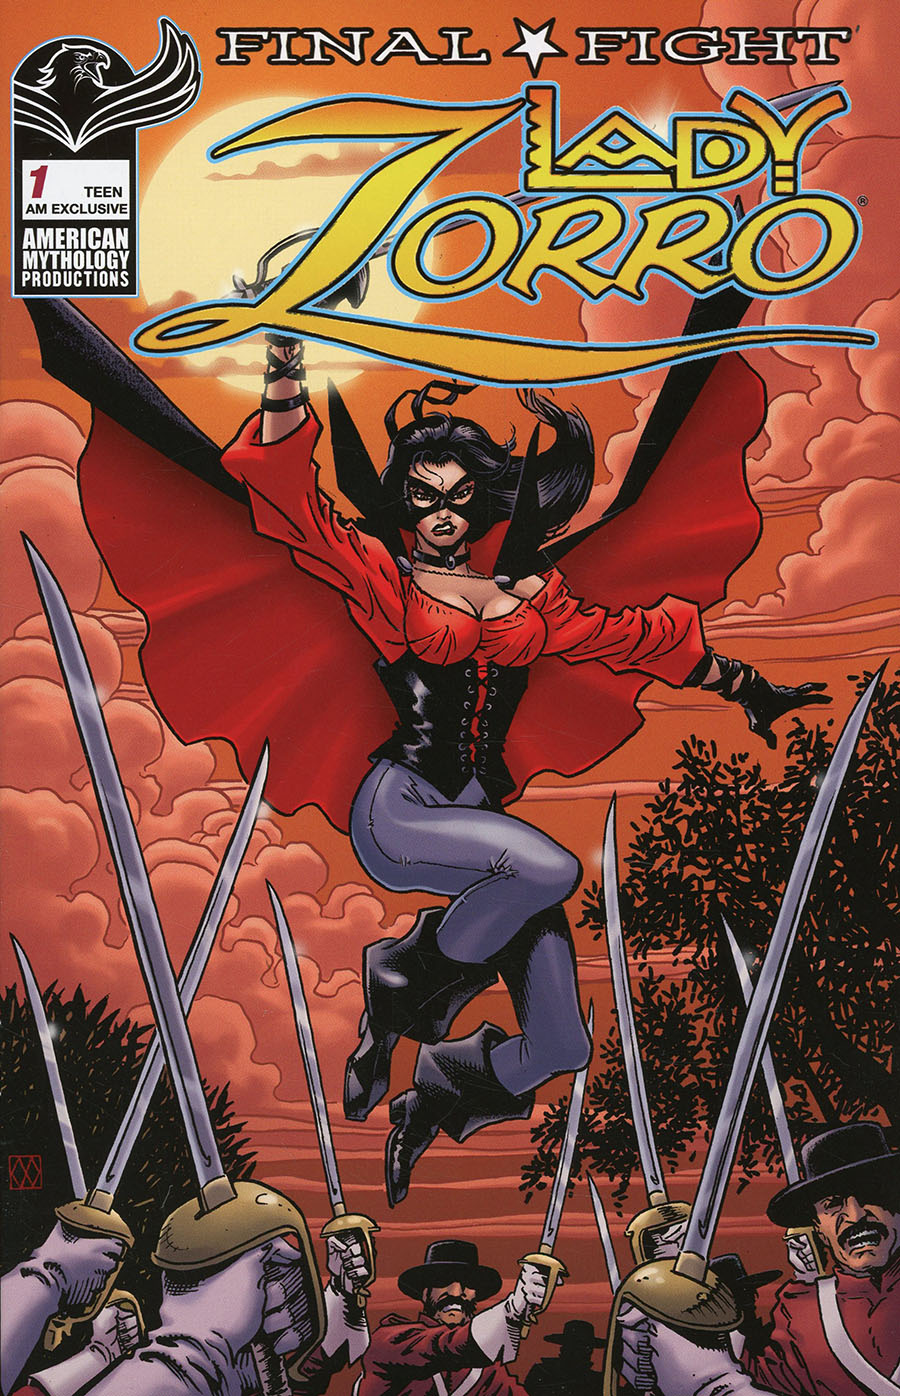 Lady Zorro Final Fight #1 Cover D American Mythology Exclusive Matt Wagner Variant Cover